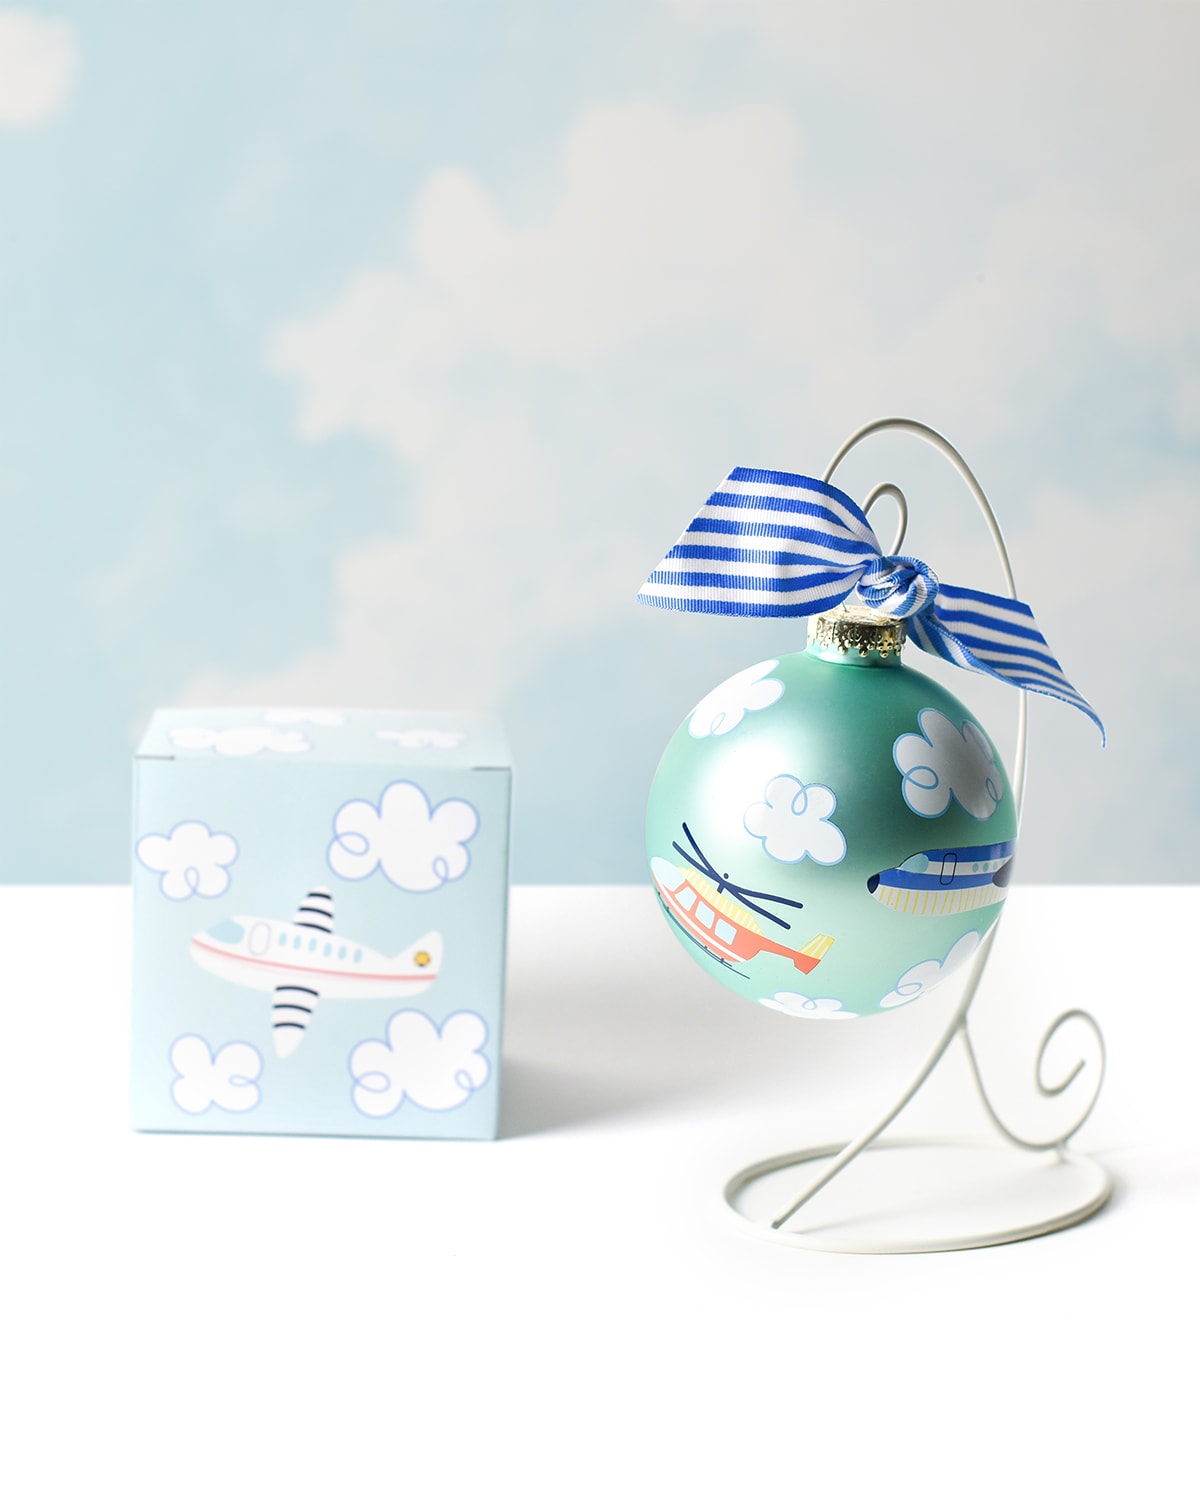 Around The World Plane Christmas Ornament with Stand, Personalized